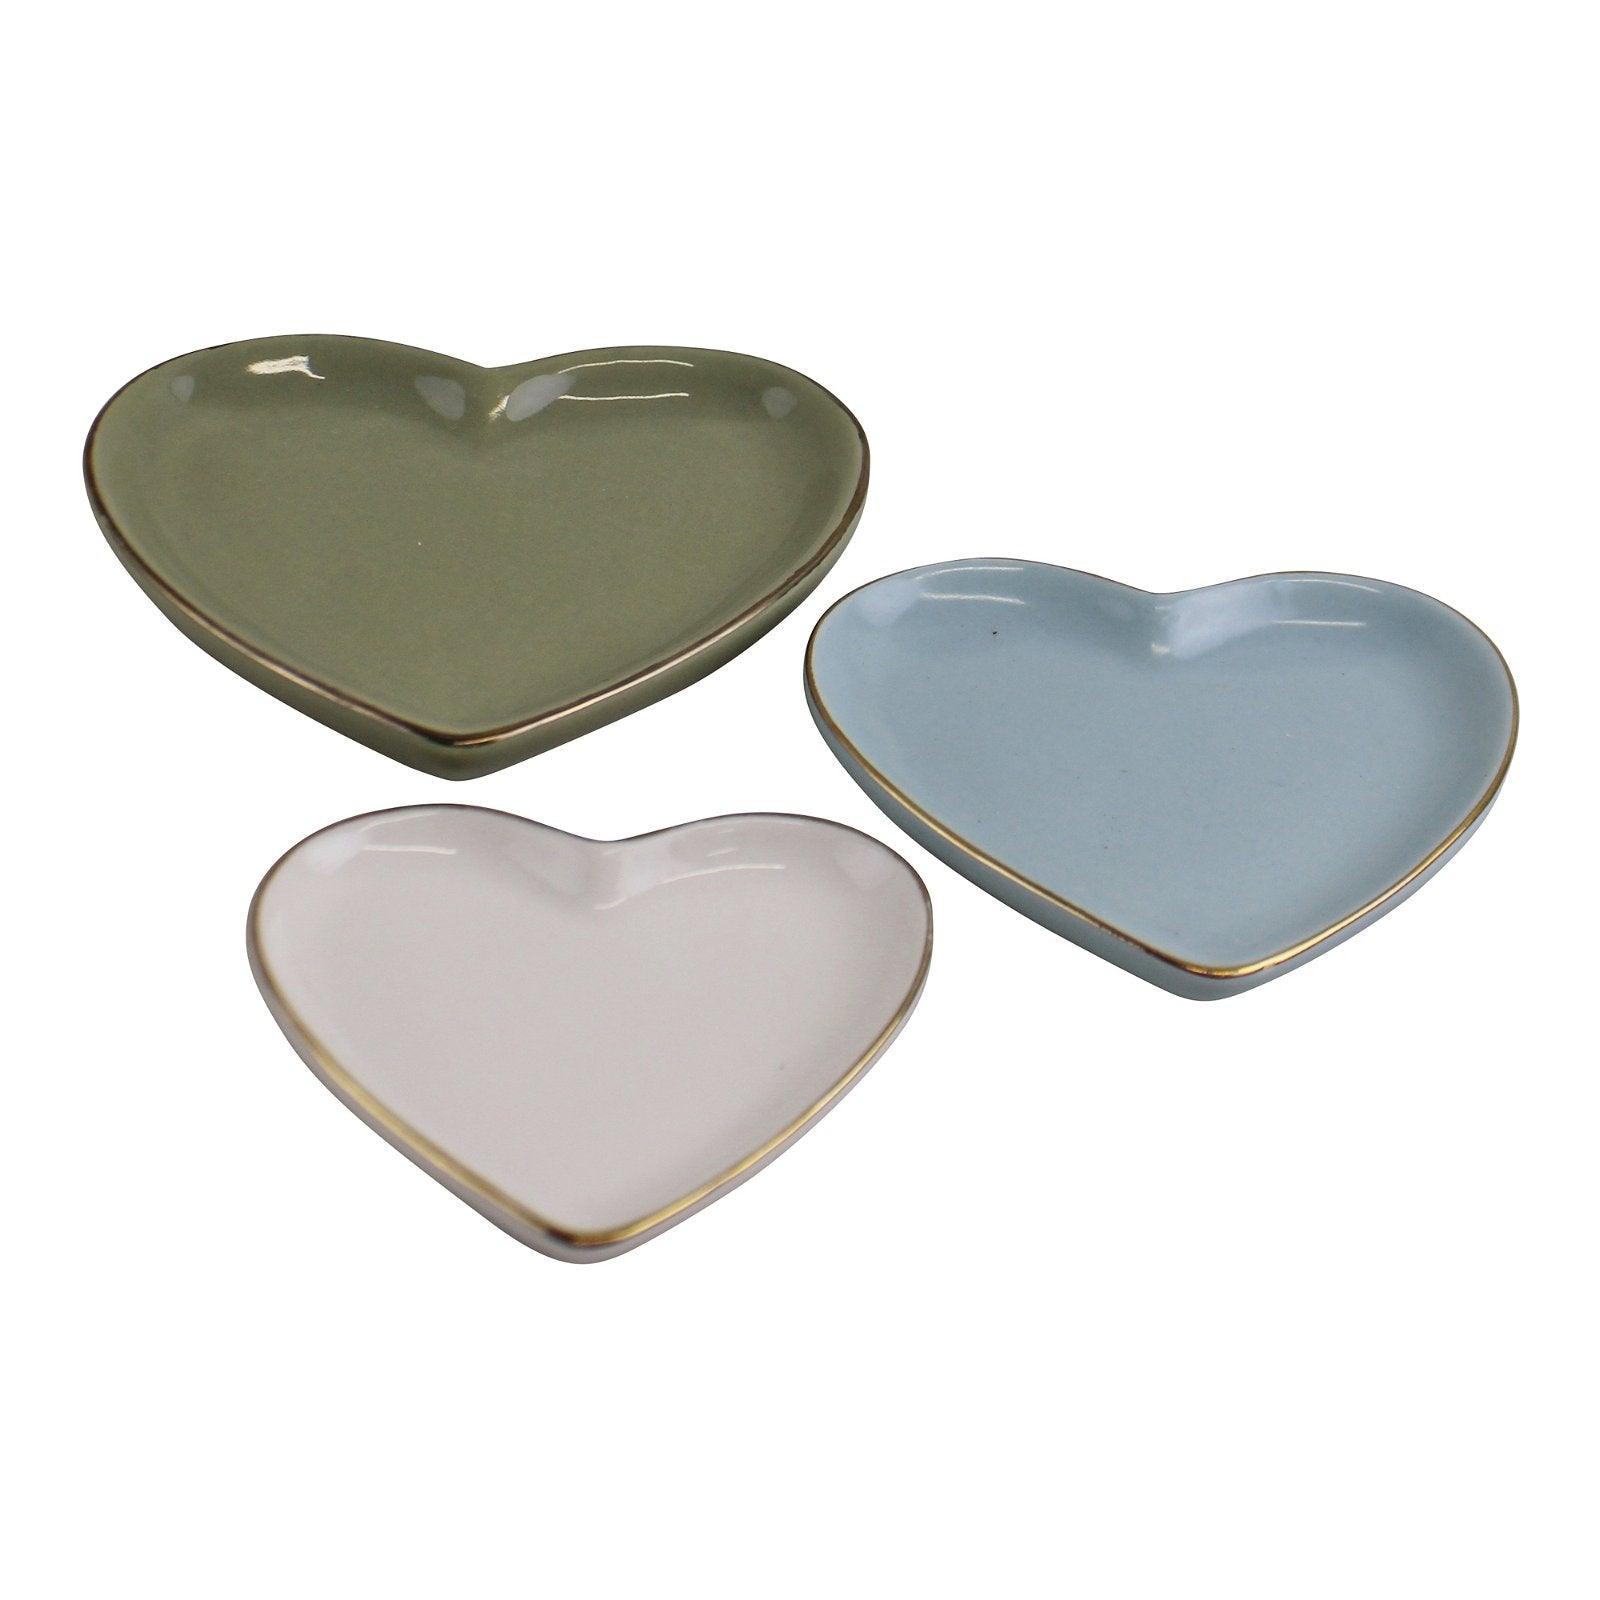 Set Of 3 Heart Shaped Ceramic Trinket Plates With A Gold Edge - £20.99 - Ornaments 